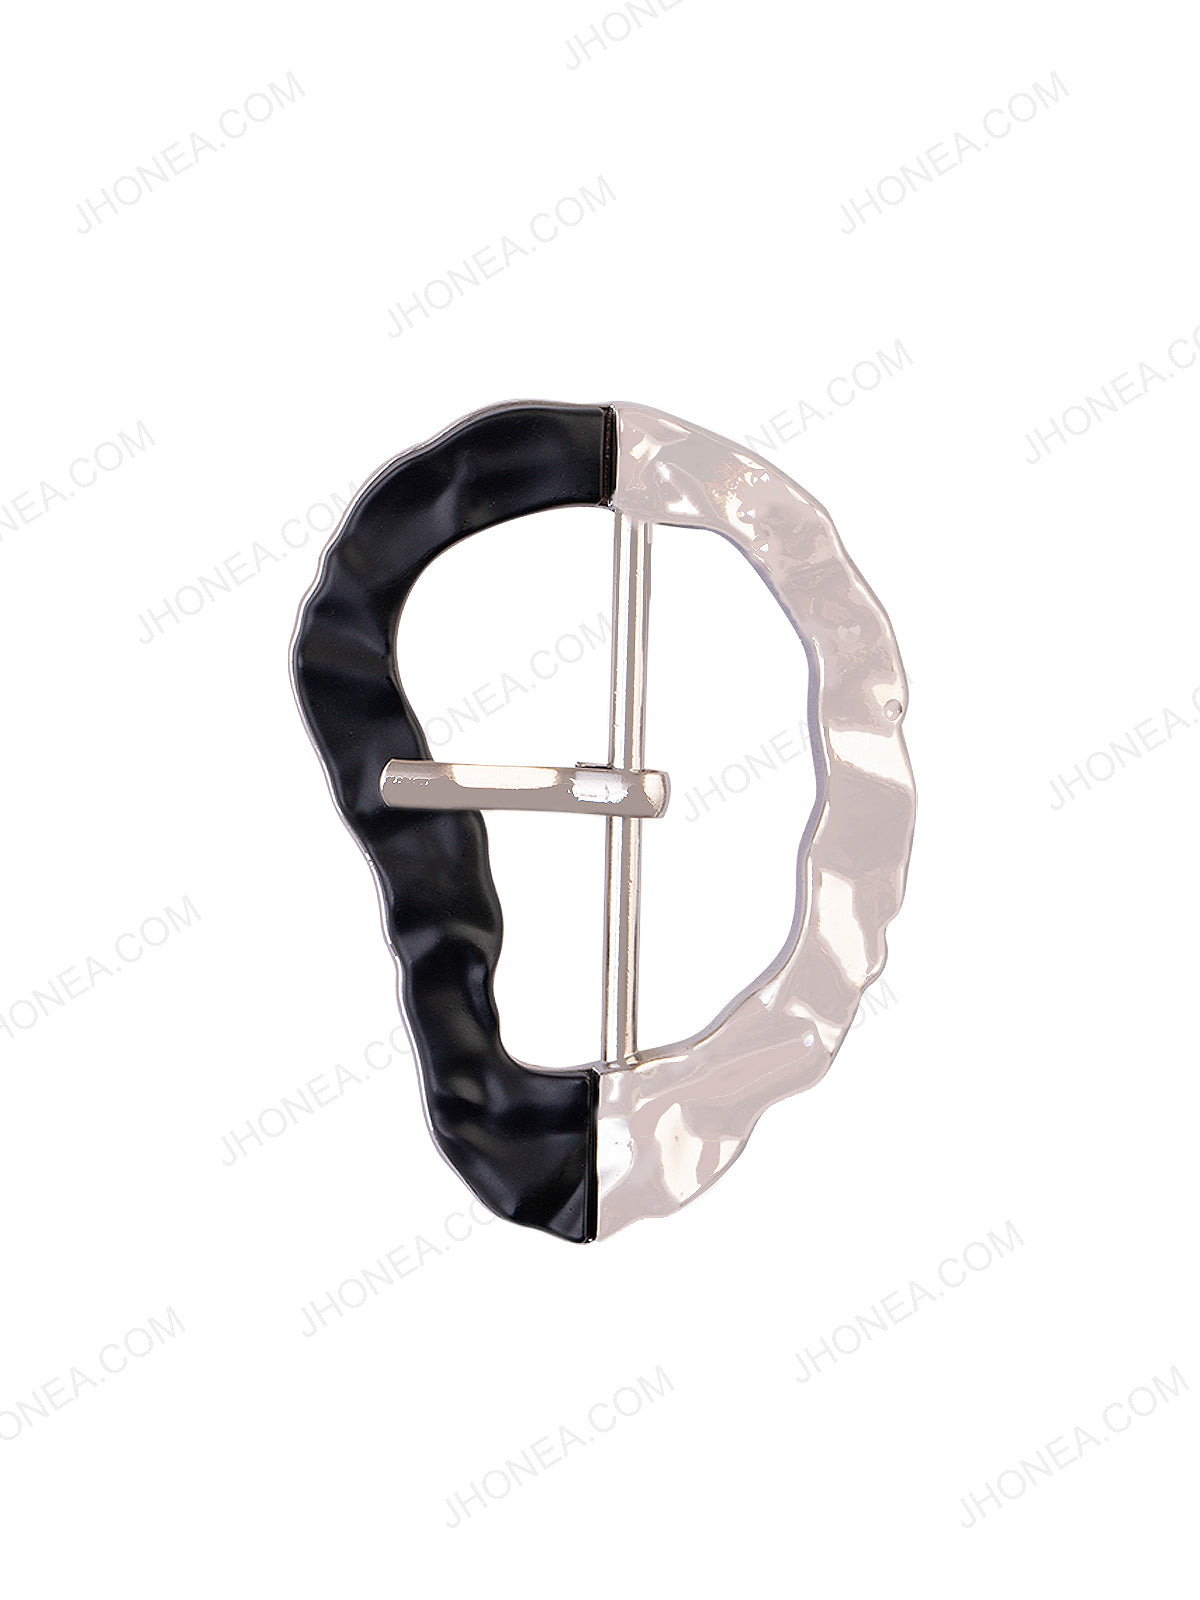 Organic Shape Shiny Silver with Black Belt Buckle with Prong